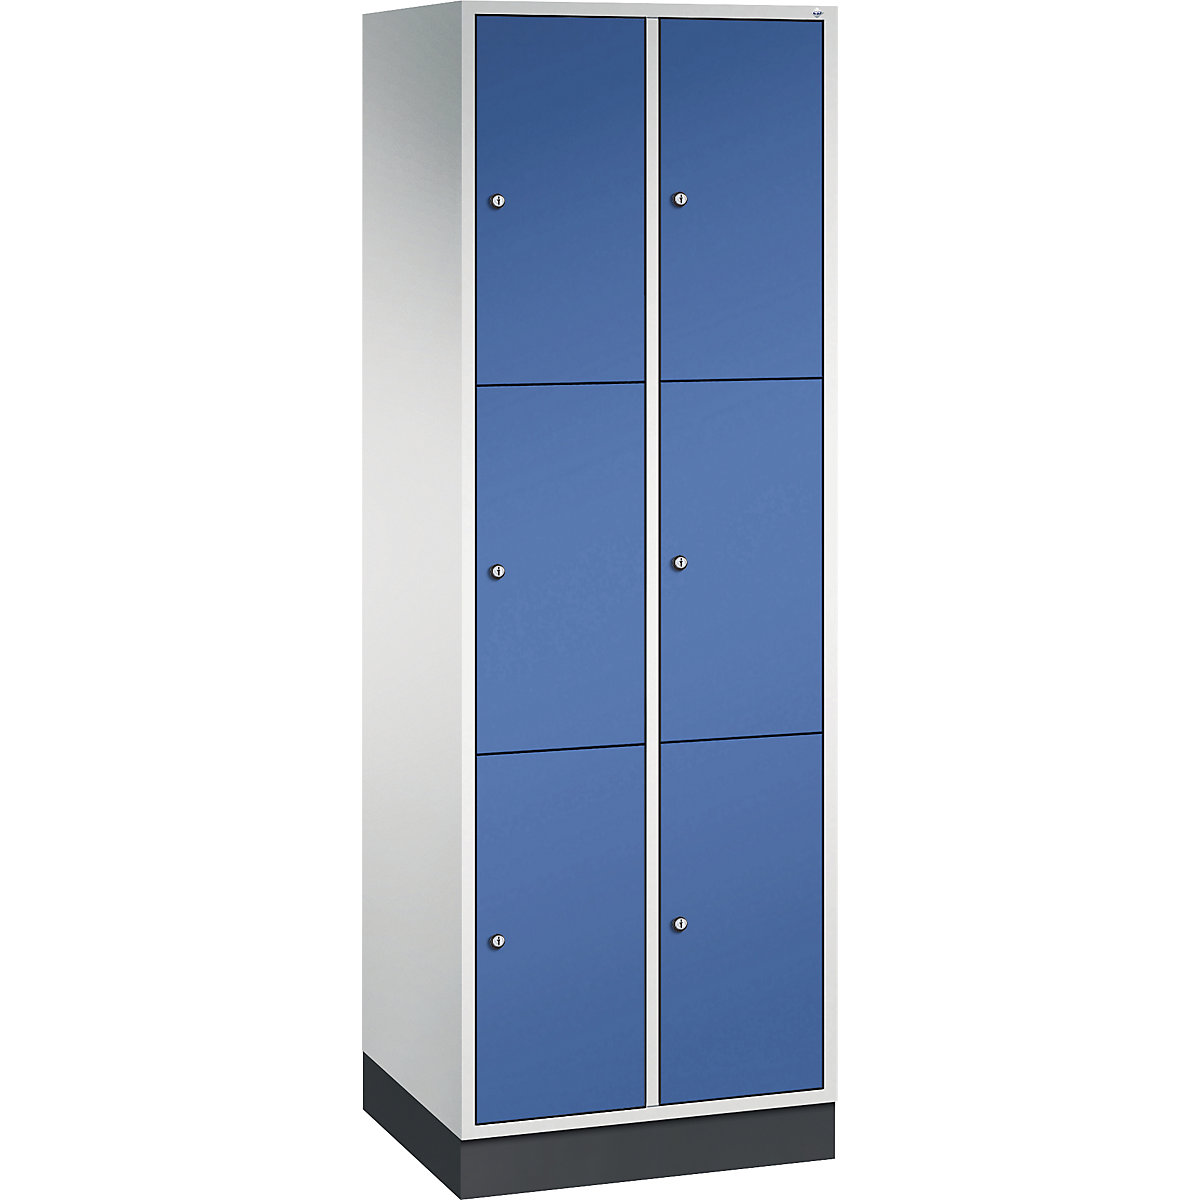 INTRO steel compartment locker, compartment height 580 mm – C+P, WxD 620 x 500 mm, 6 compartments, light grey body, gentian blue doors